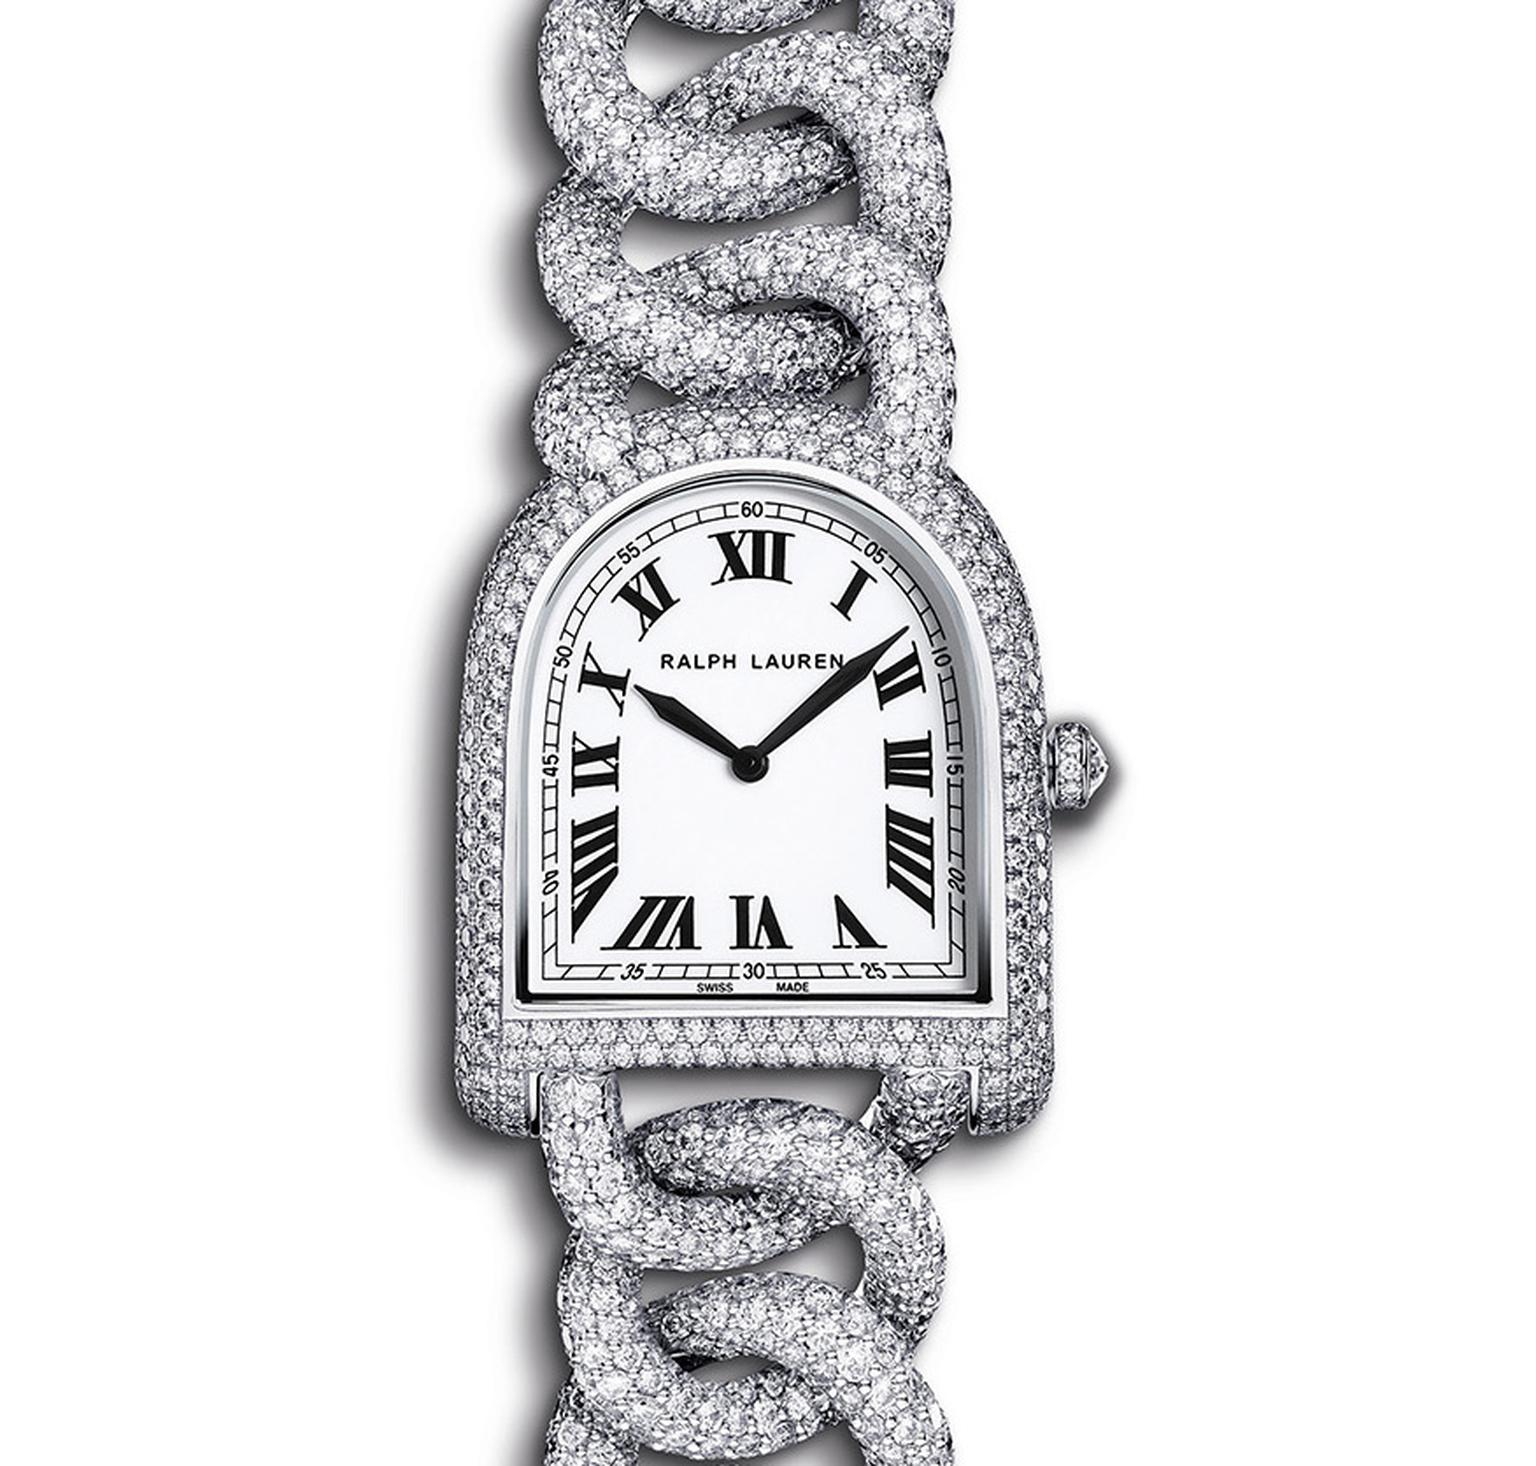 Ralph Lauren Petite Link watch in white gold, fully pavéd with diamonds